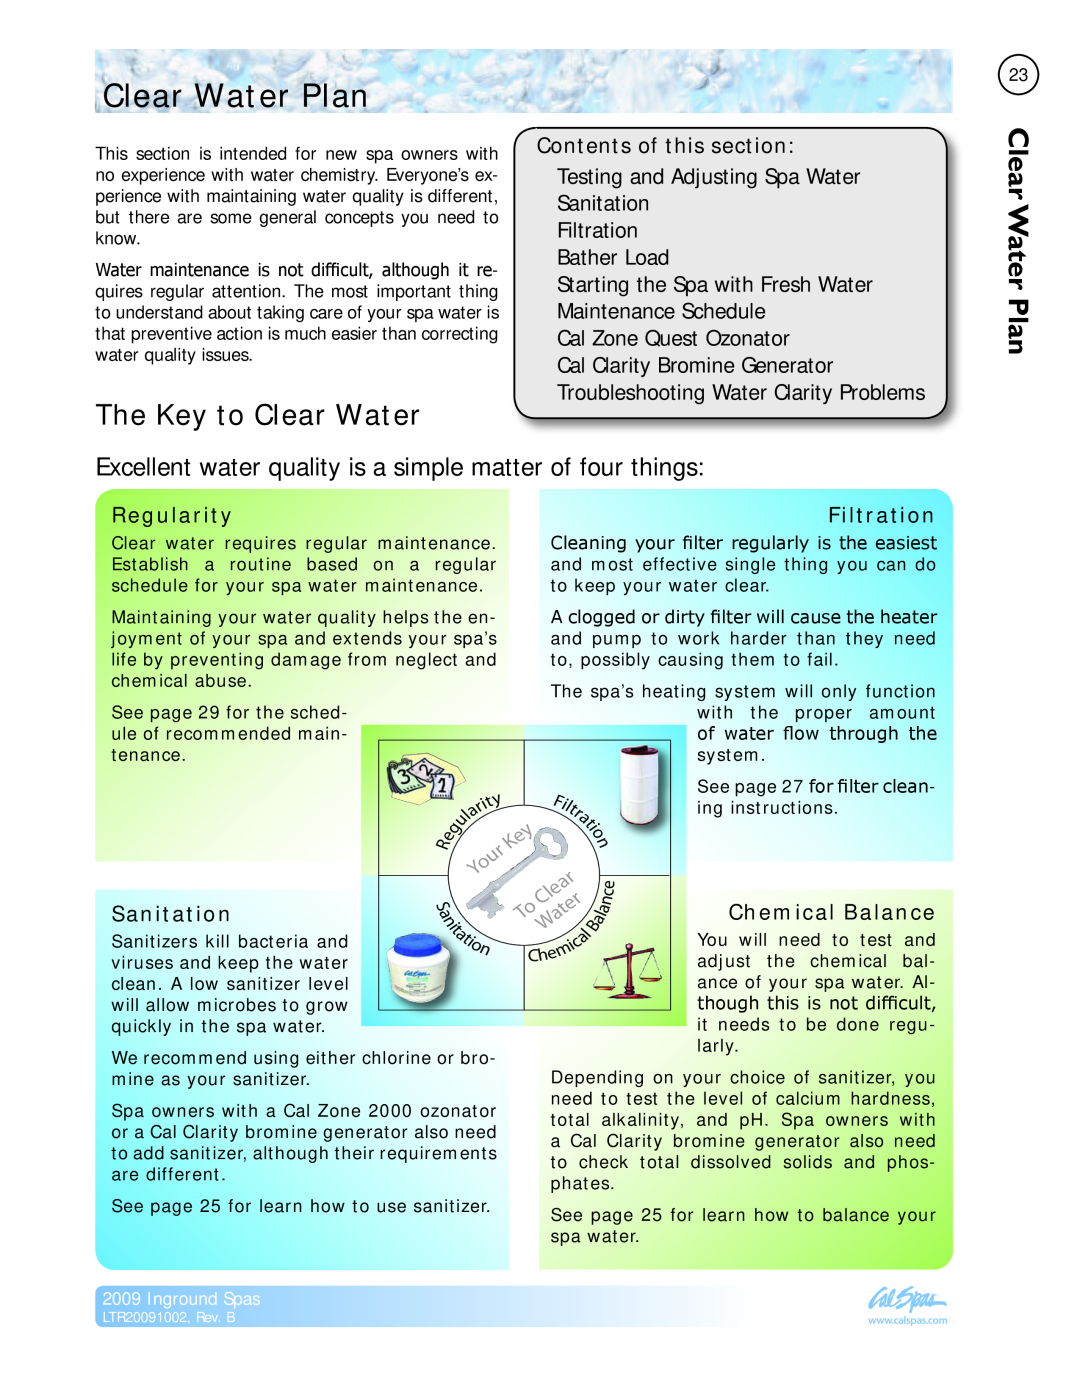 Cal Spas LTR20091002 manual Clear Water Plan, The Key to Clear Water 